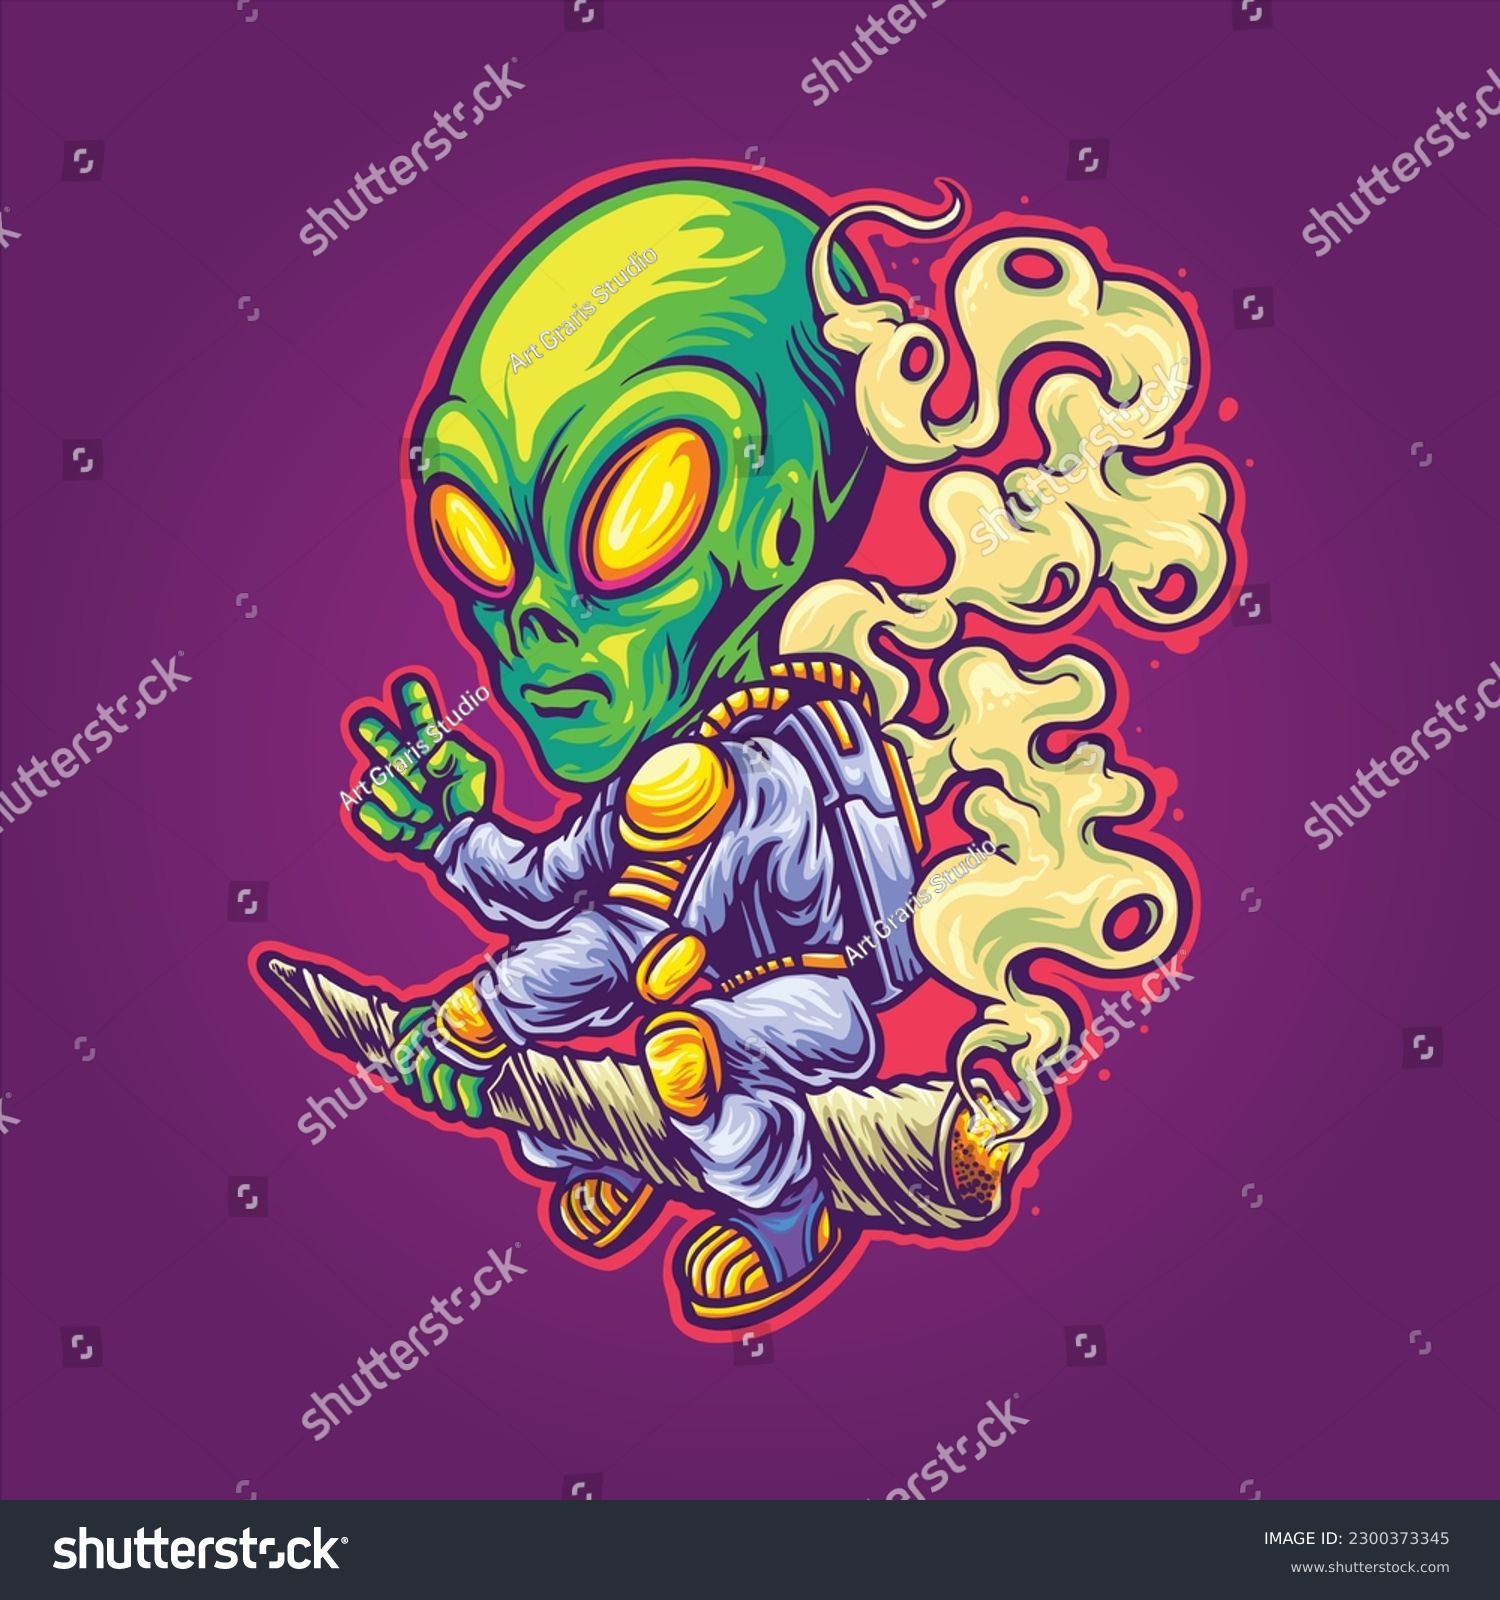 SVG of Astronaut alien cruise on space with cannabis joint rocket illustrations vector for your work logo, merchandise t-shirt, stickers and label designs, poster, greeting cards advertising business company svg